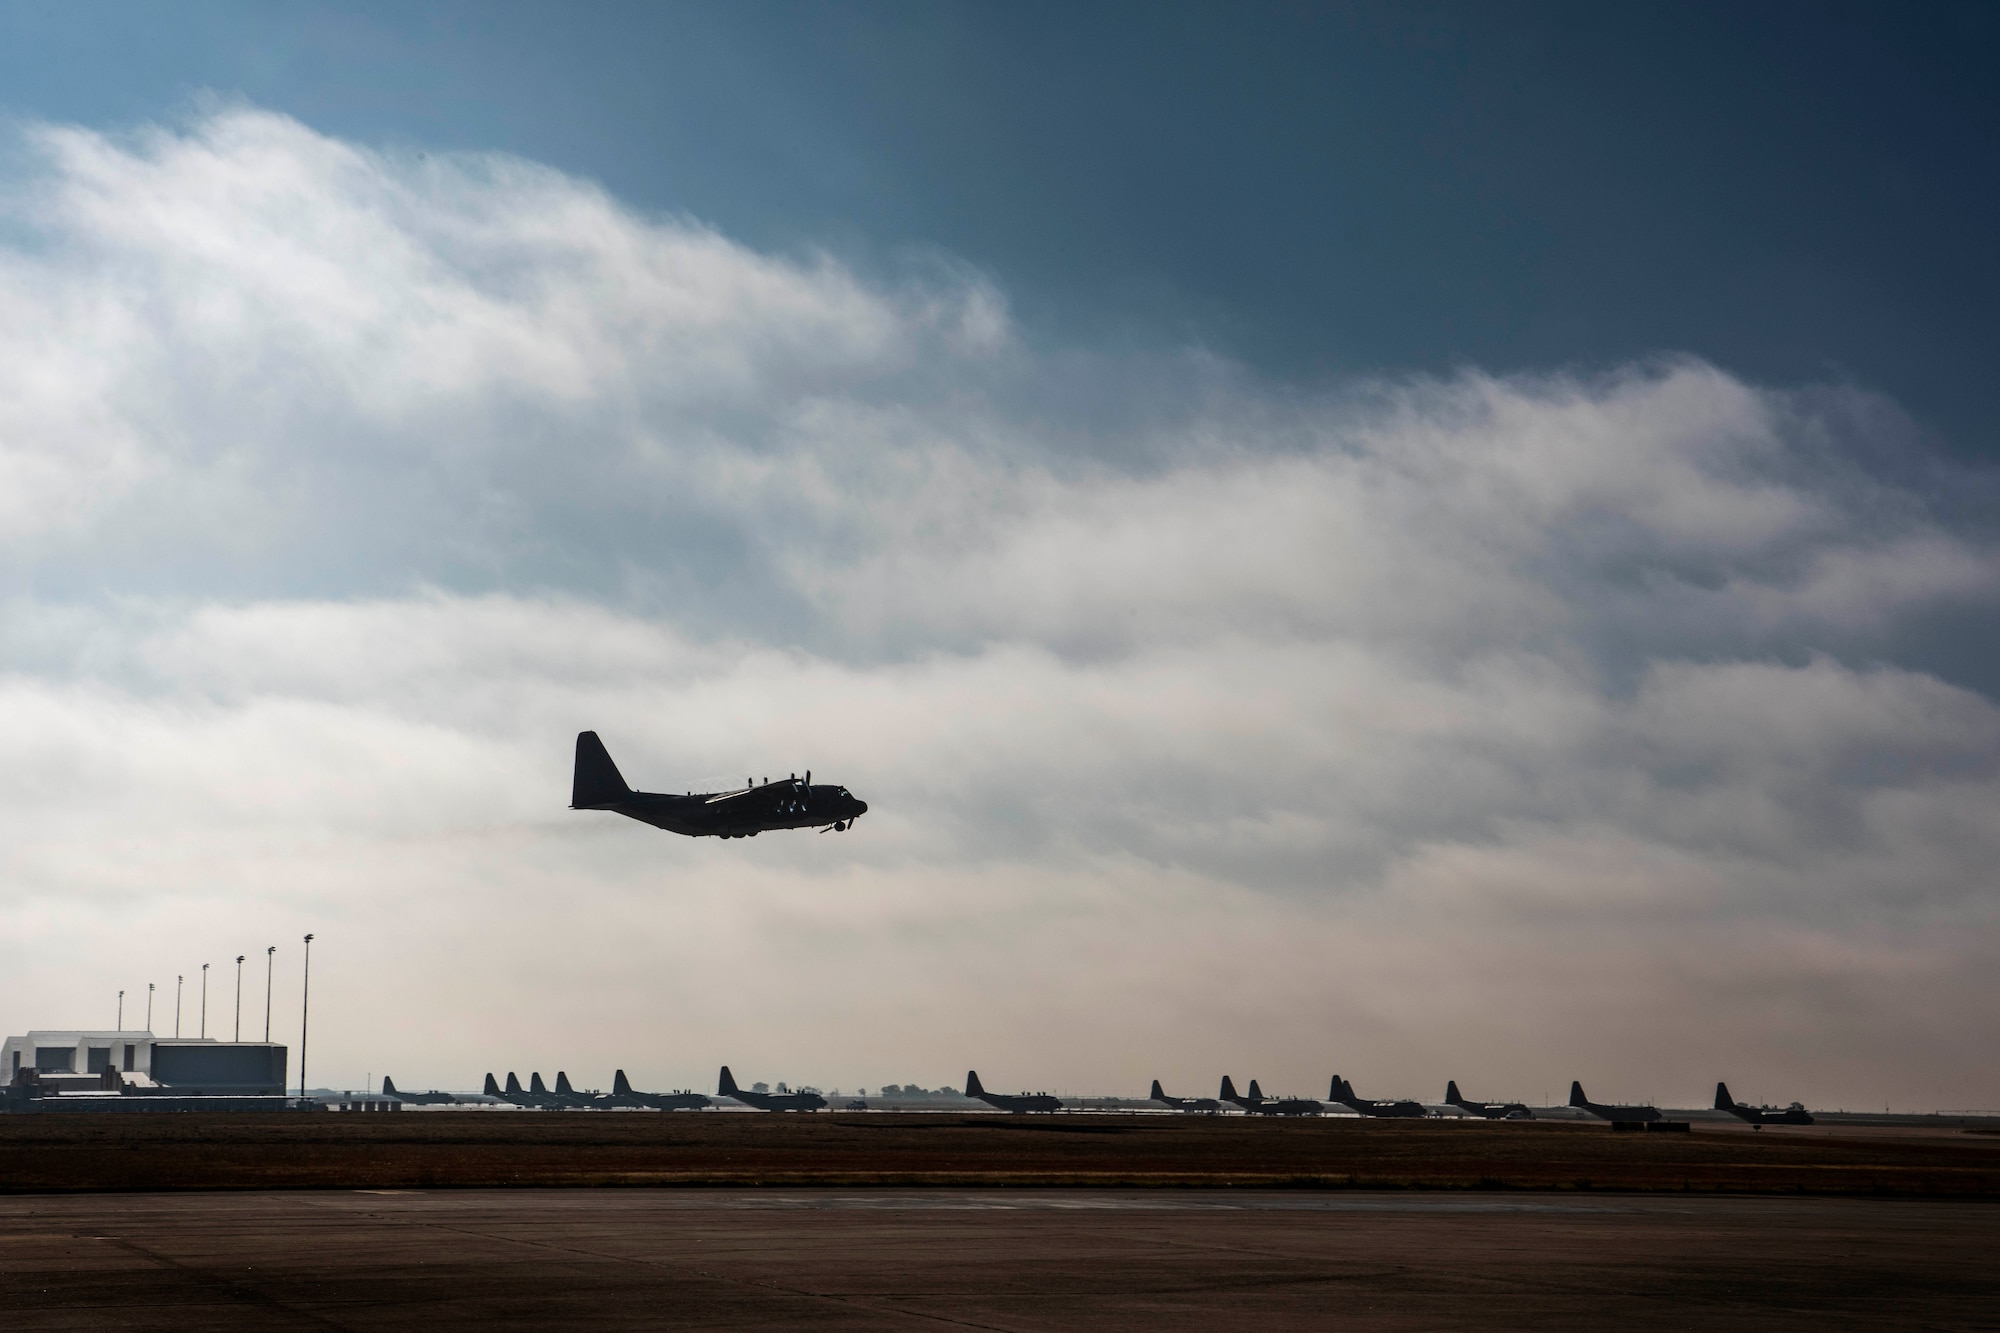 An AC-130W Stinger II gunship, Tail No. 1303, flies over the runway at Cannon Air Force Base, N.M., during its final flight prior to retirement Oct. 19, 2020. The aircraft traveled to Sheppard Air Force Base, Texas, where it will permanently stay and be used as a weapons training system for Airmen in weapons school. (U.S. Air Force photo by Staff Sgt. Luke Kitterman)